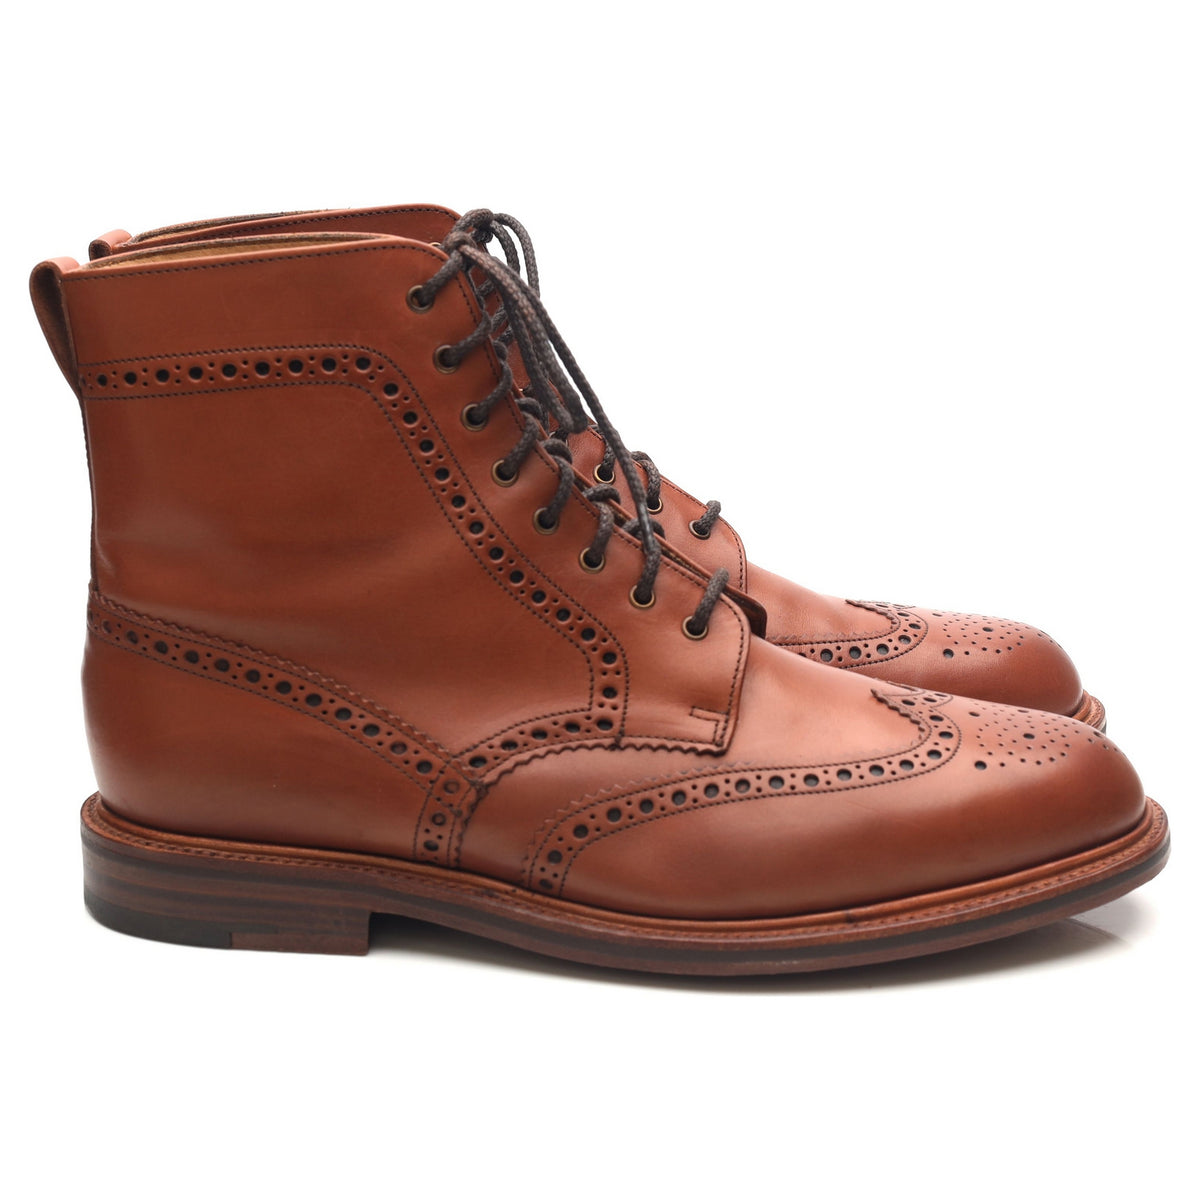 Tan Brown Leather Brogue Boots UK 8.5 F